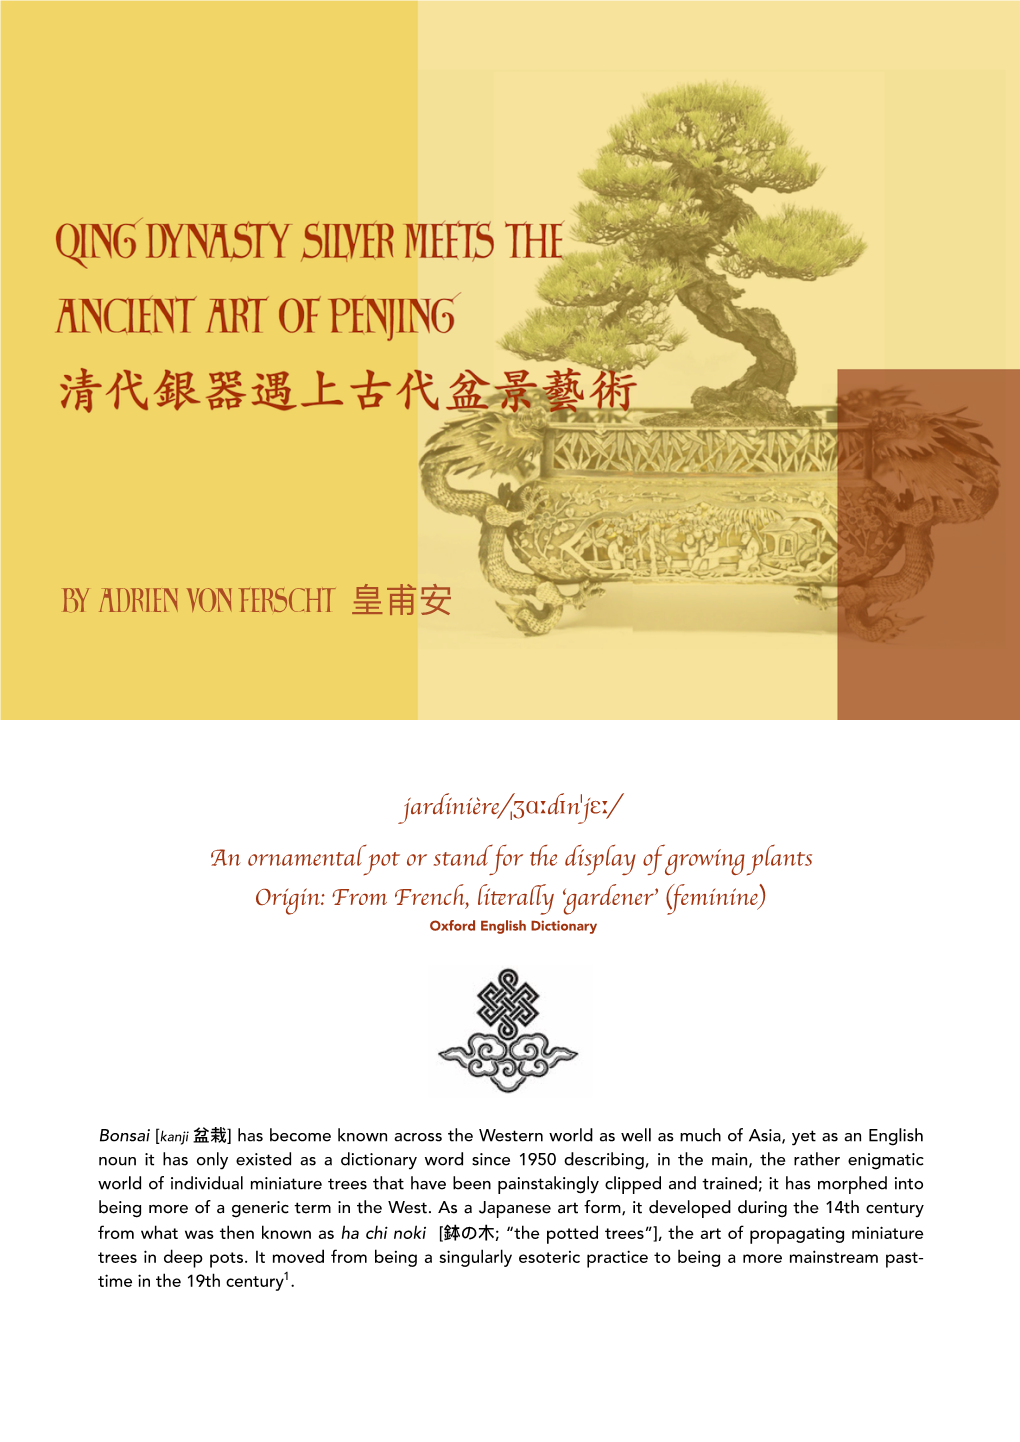 QING DYNASTY SILVER MEETS the ANCIENT ART of PENJING.Pages